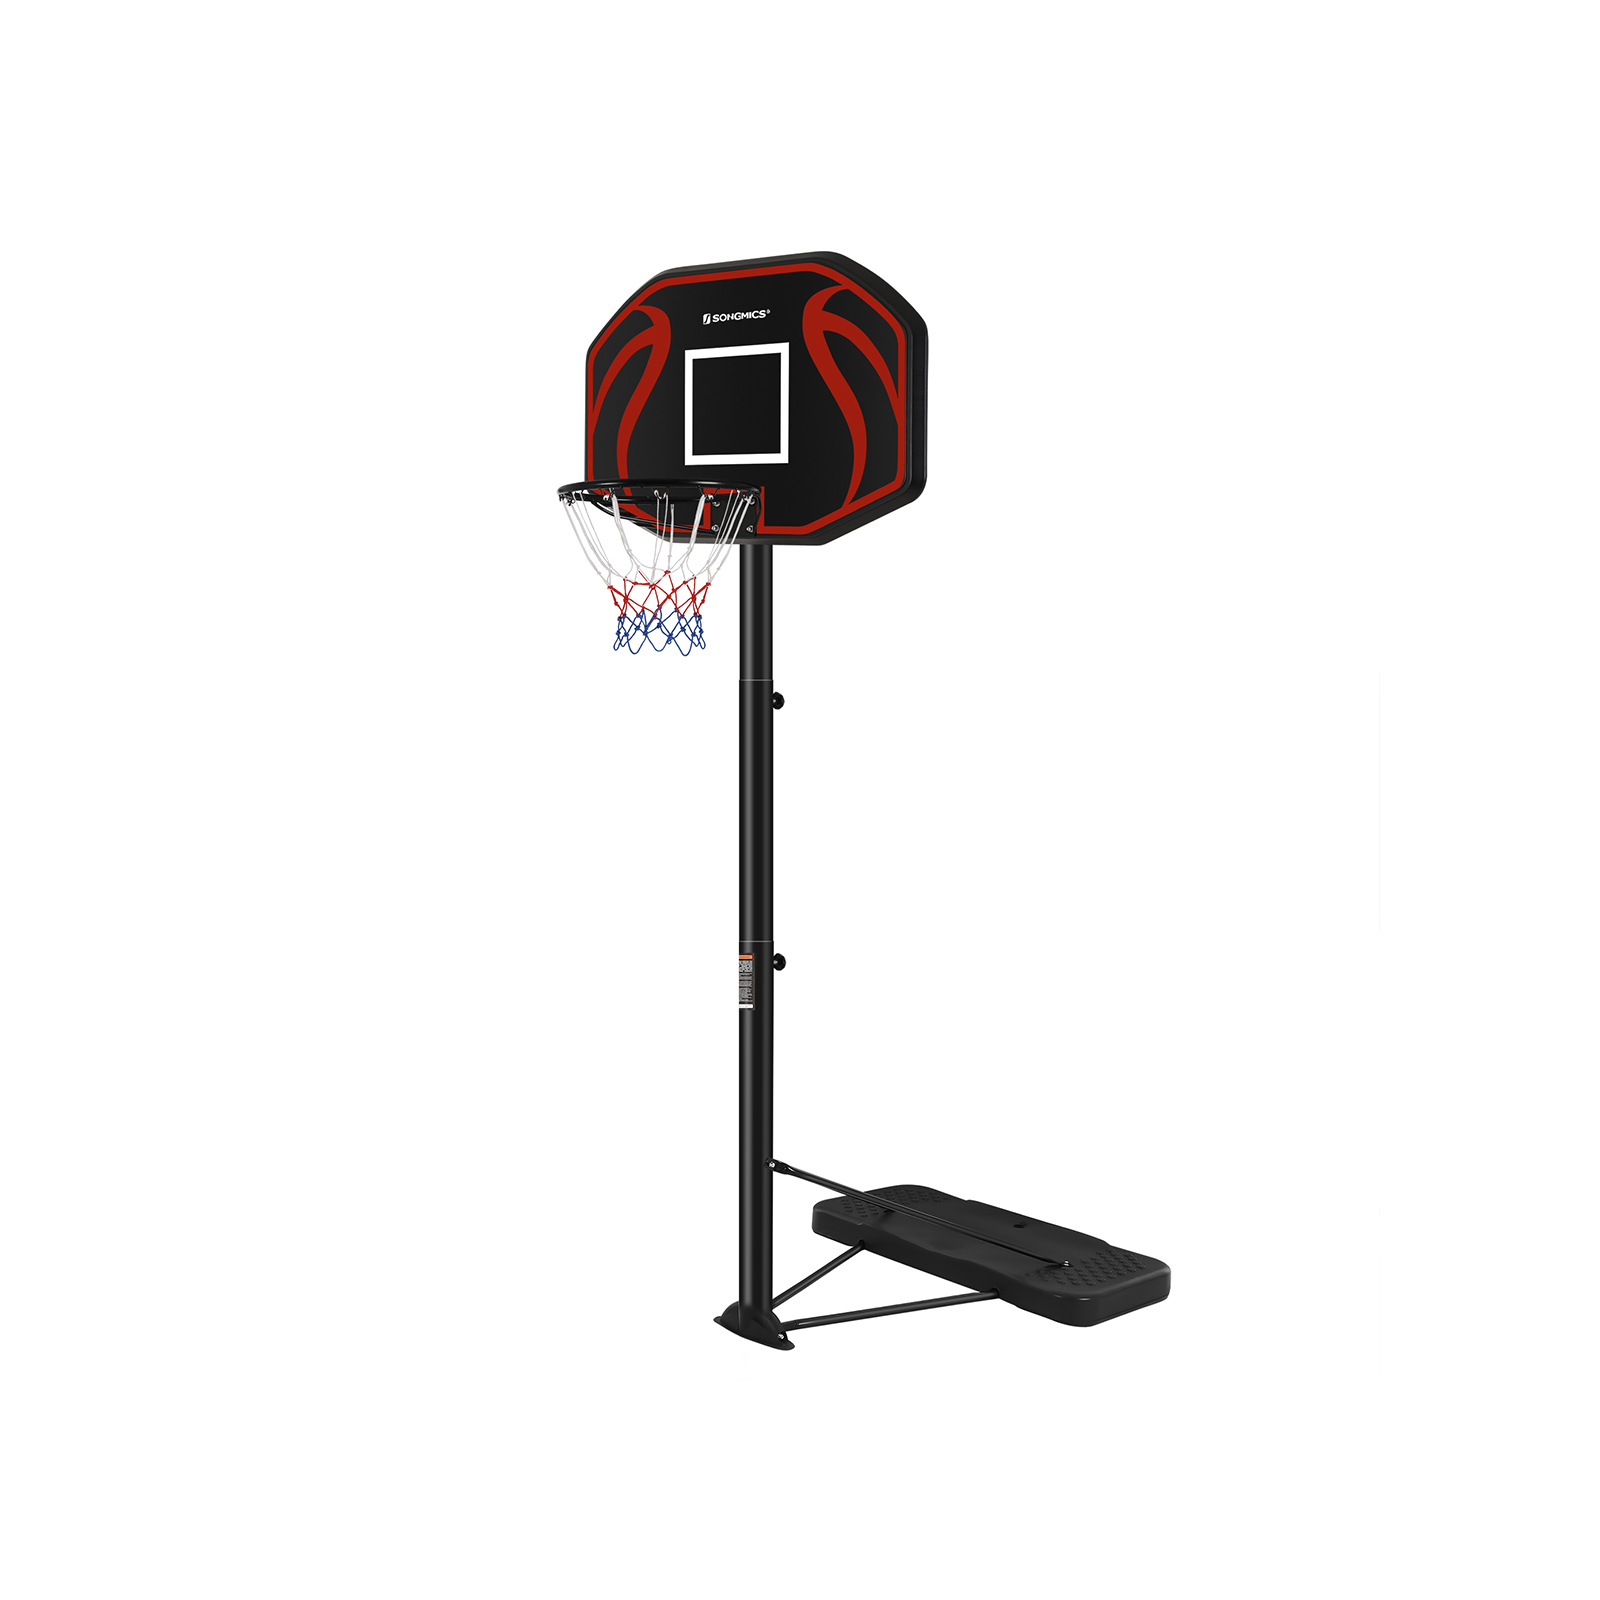 probase steel stand for portable basketball hoop